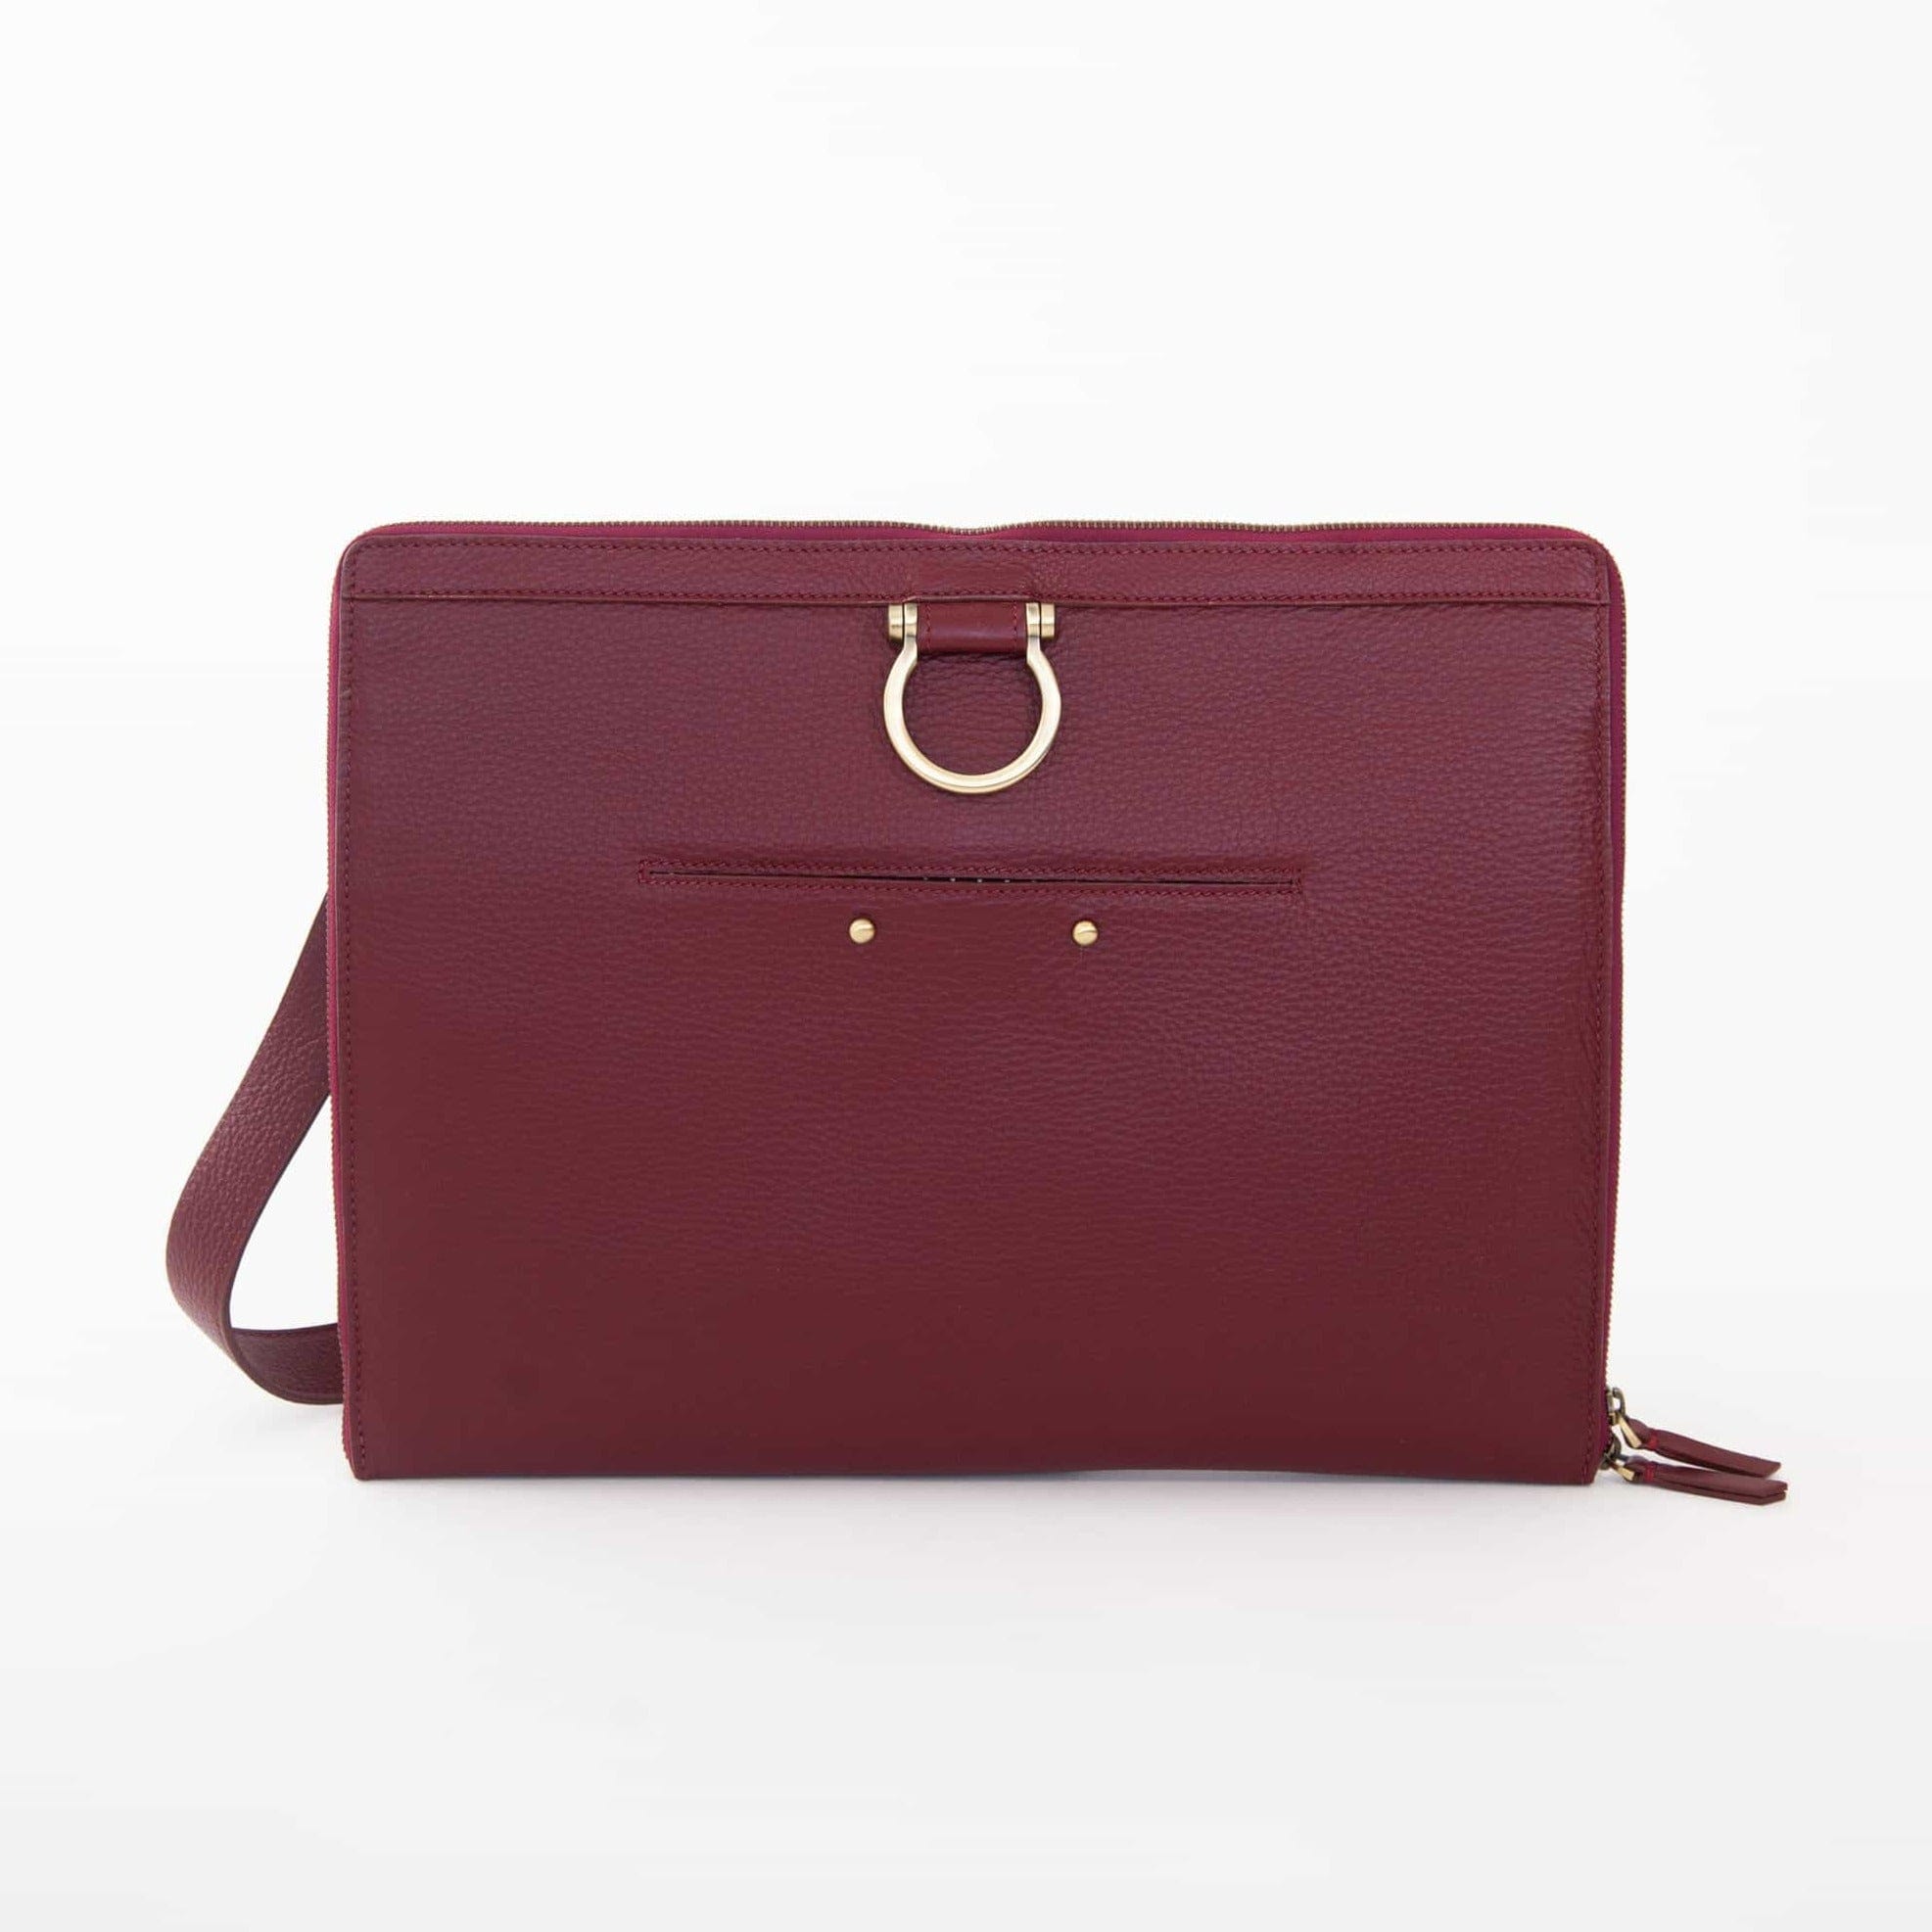 The M XL crossbody bag in deep red oil leather has a zip enclosure, front exterior stud pocket, and Omega hardware.